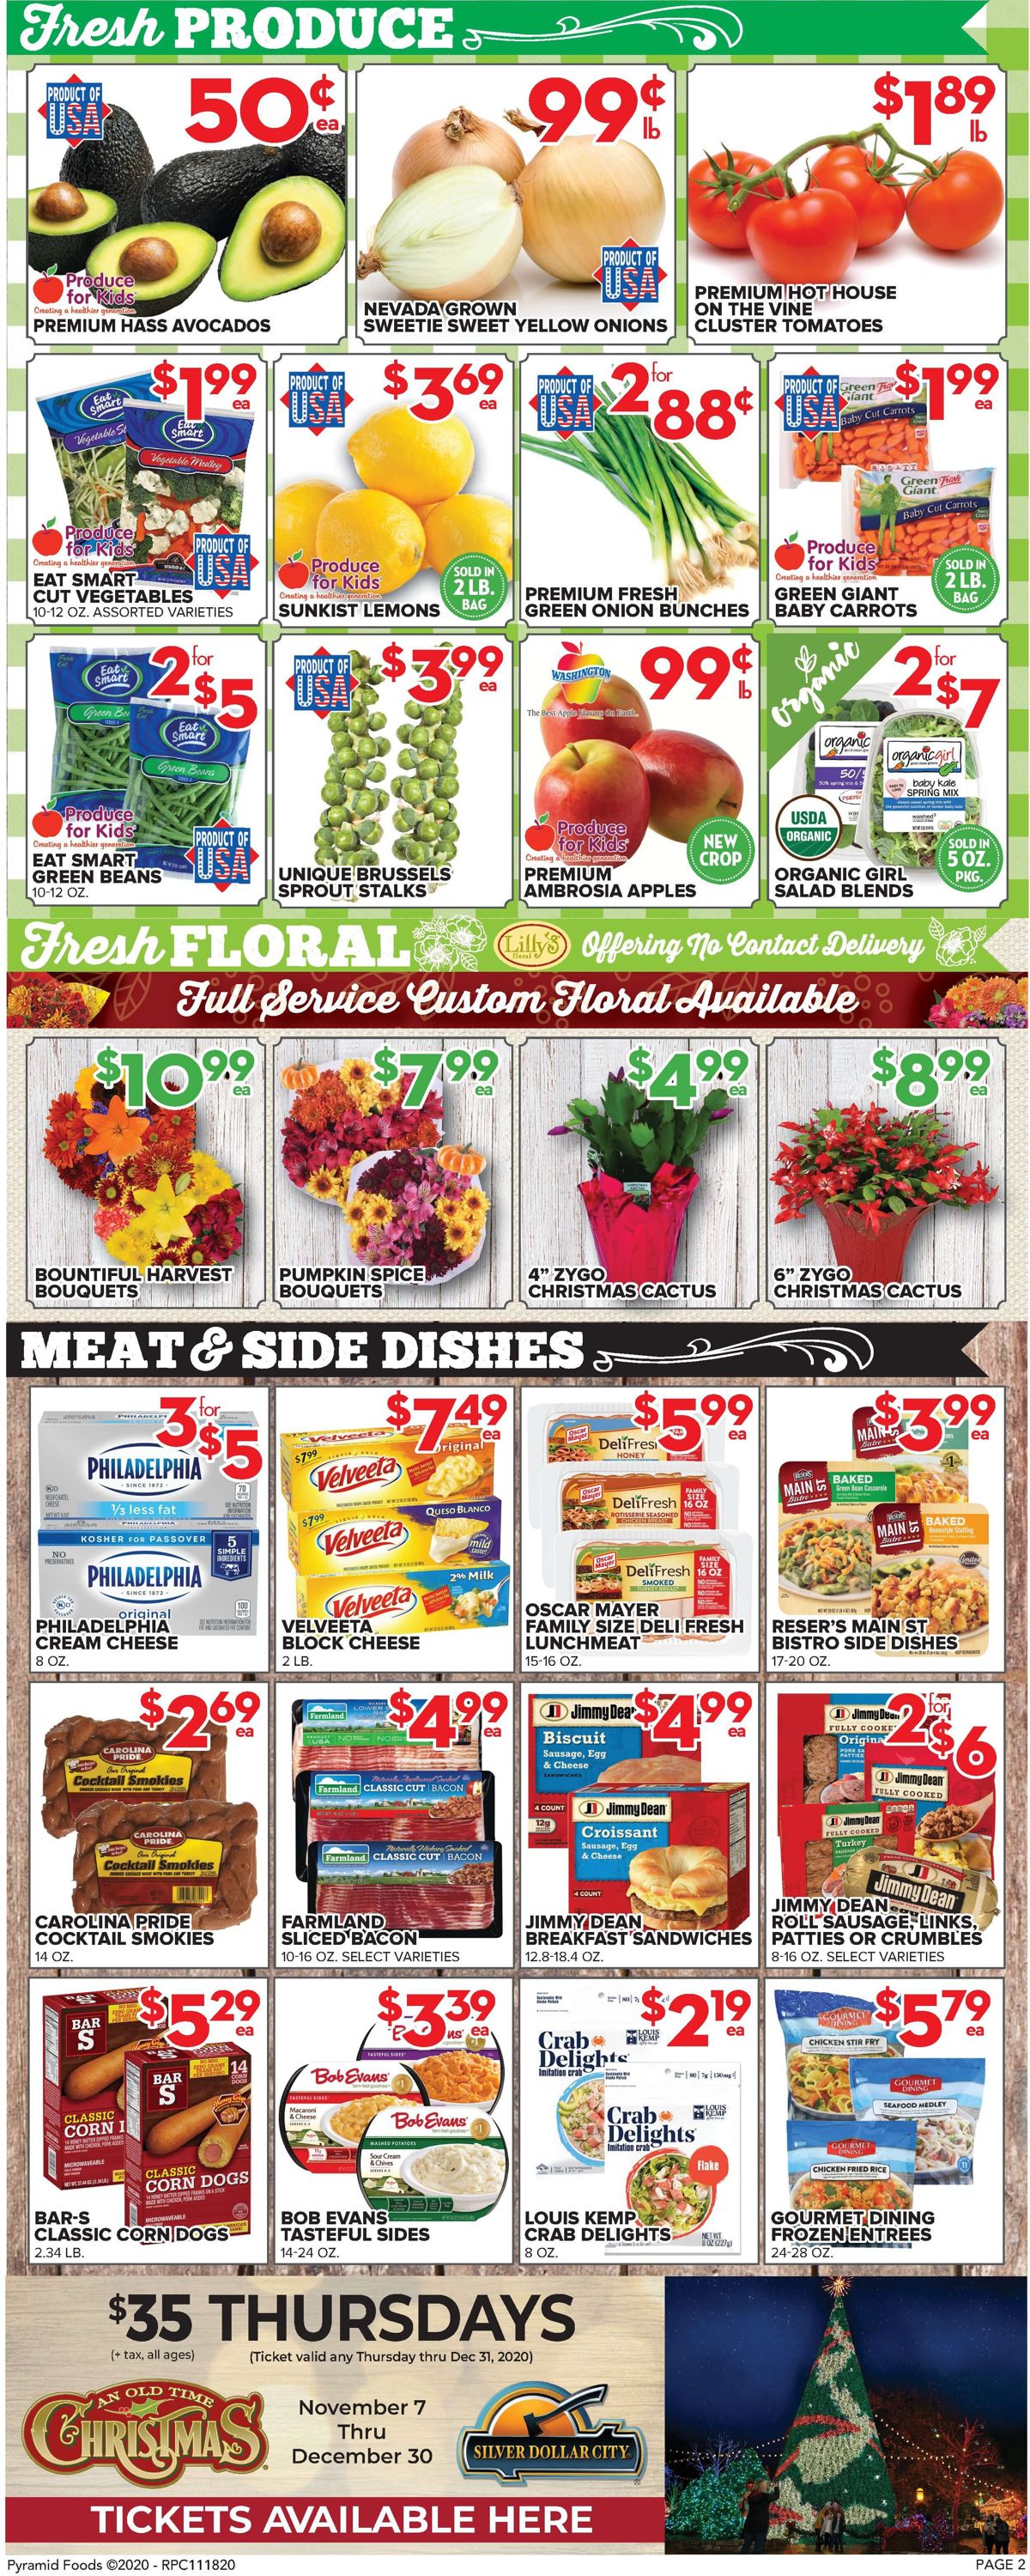 Price Cutter Thanksgiving ad 2020 Weekly Ad Circular - valid 11/18-11/26/2020 (Page 2)